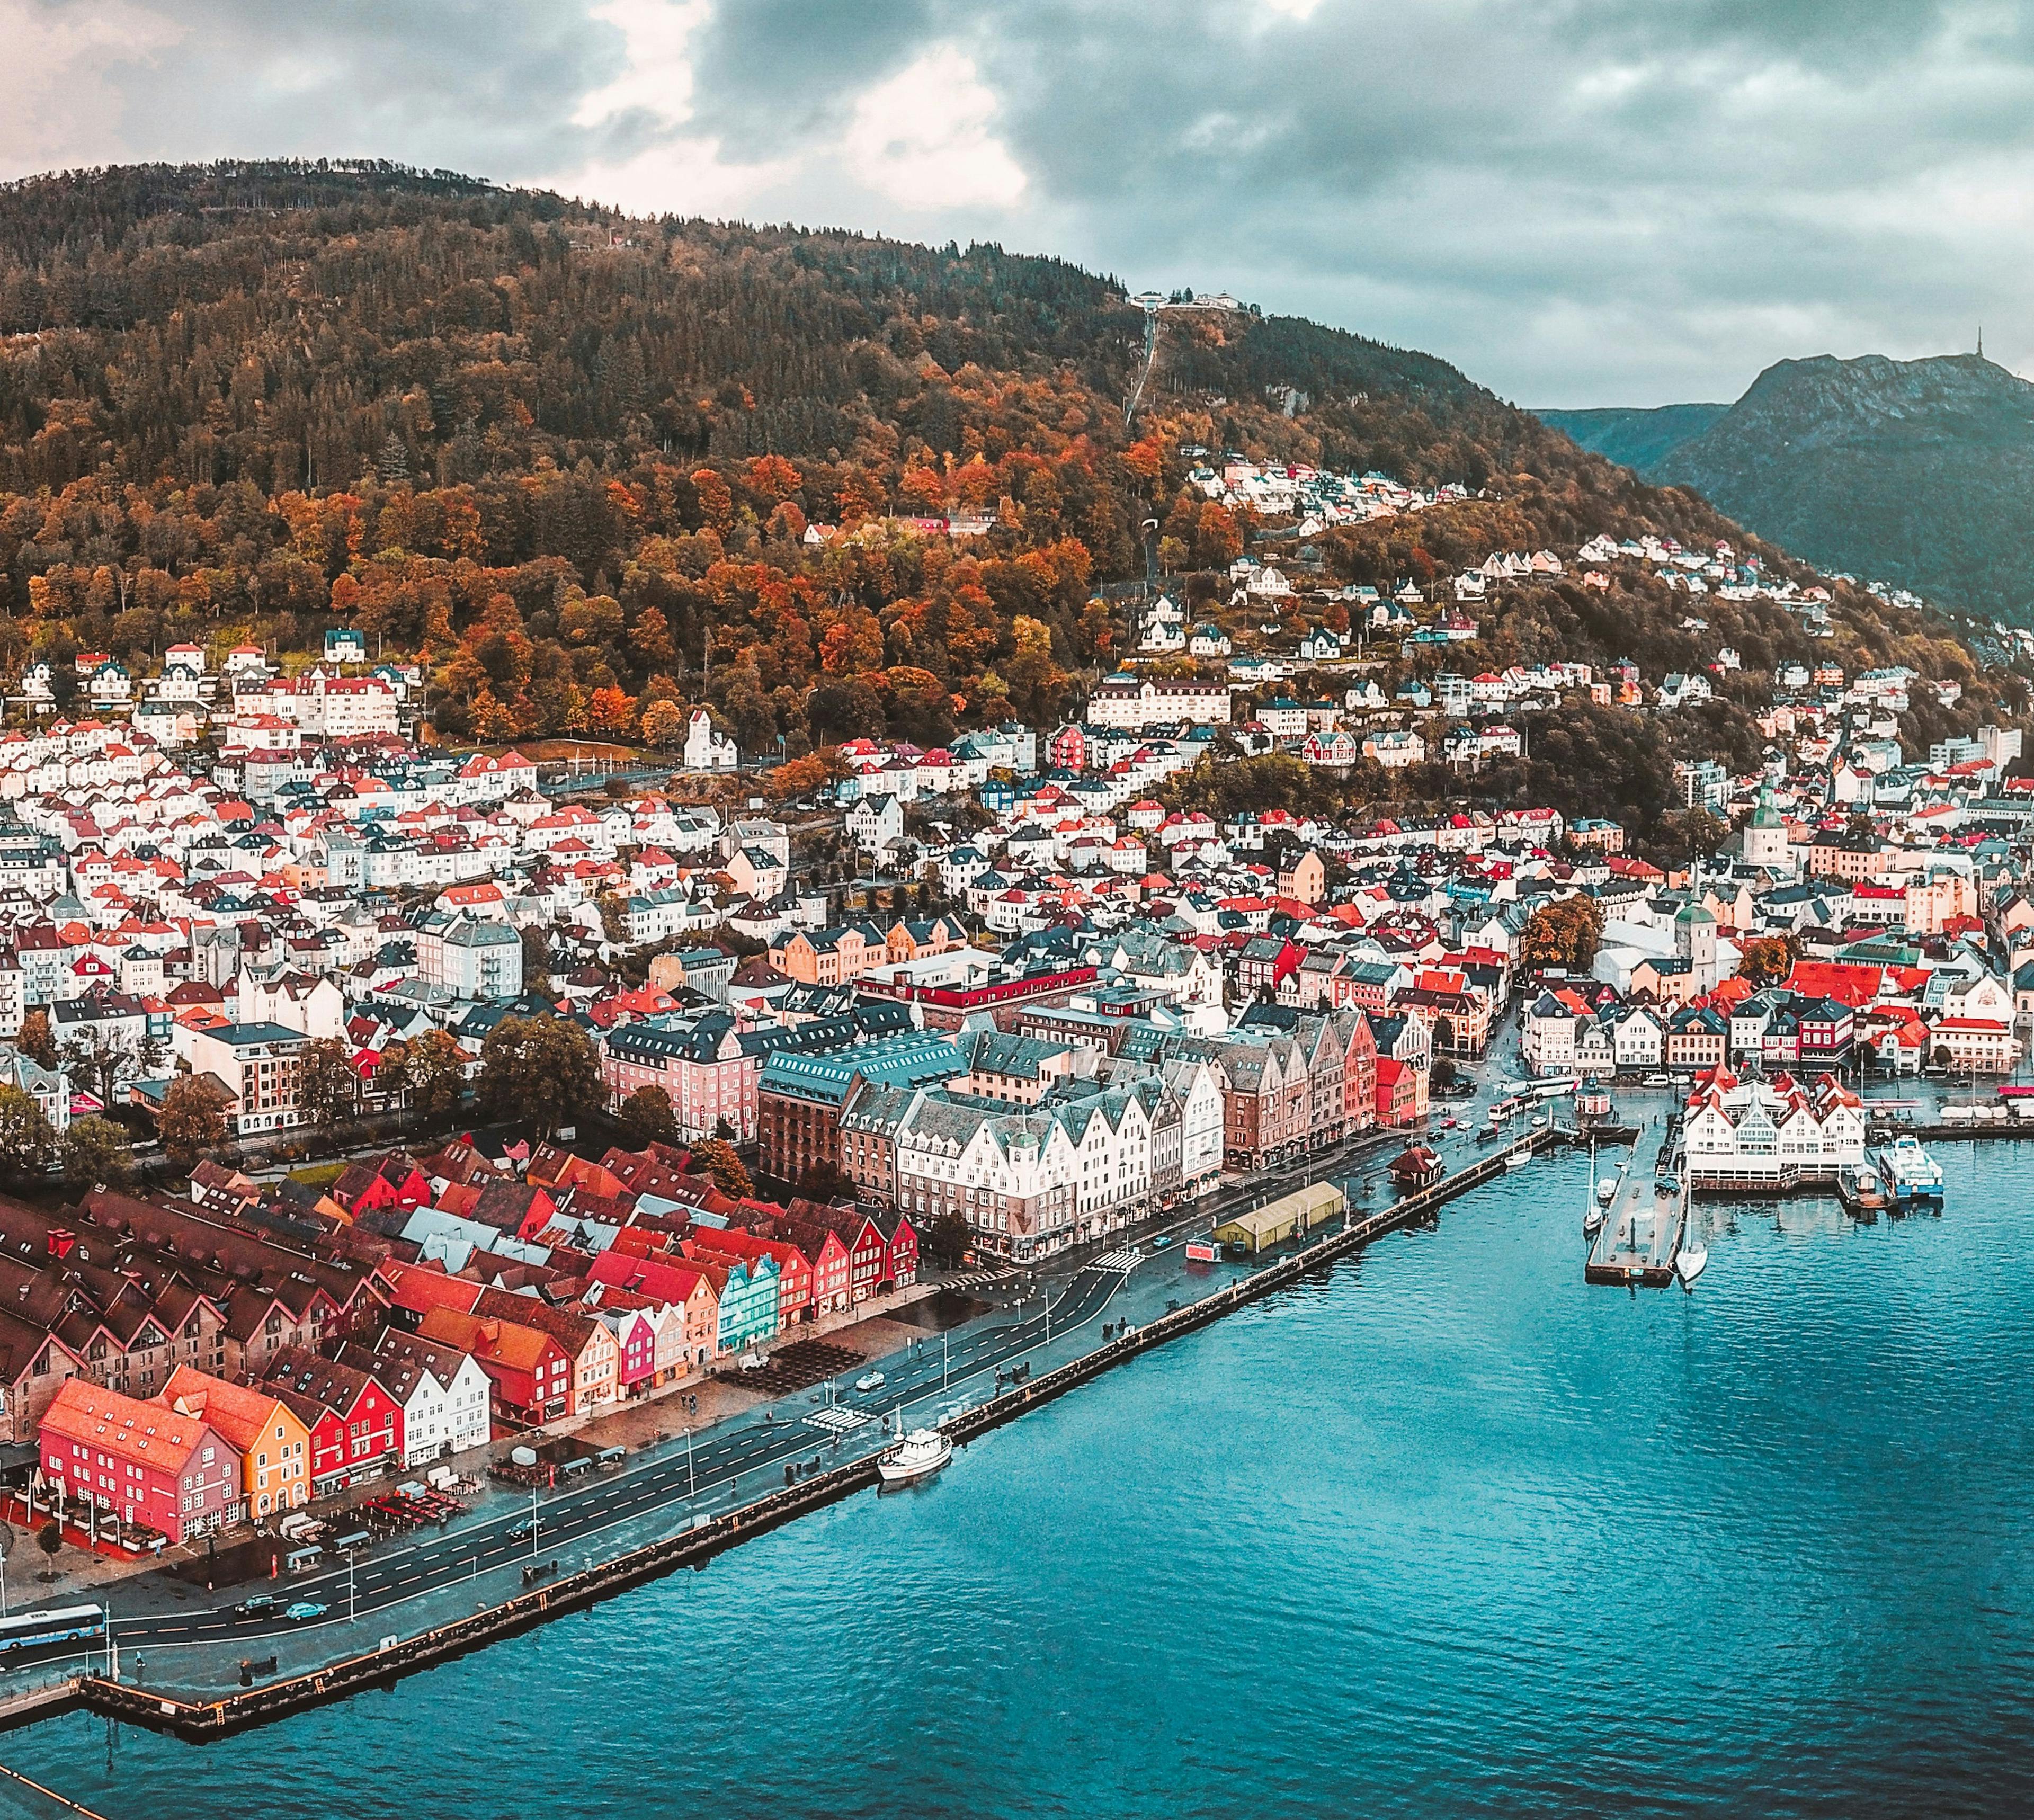 Overview of the city of Bergen